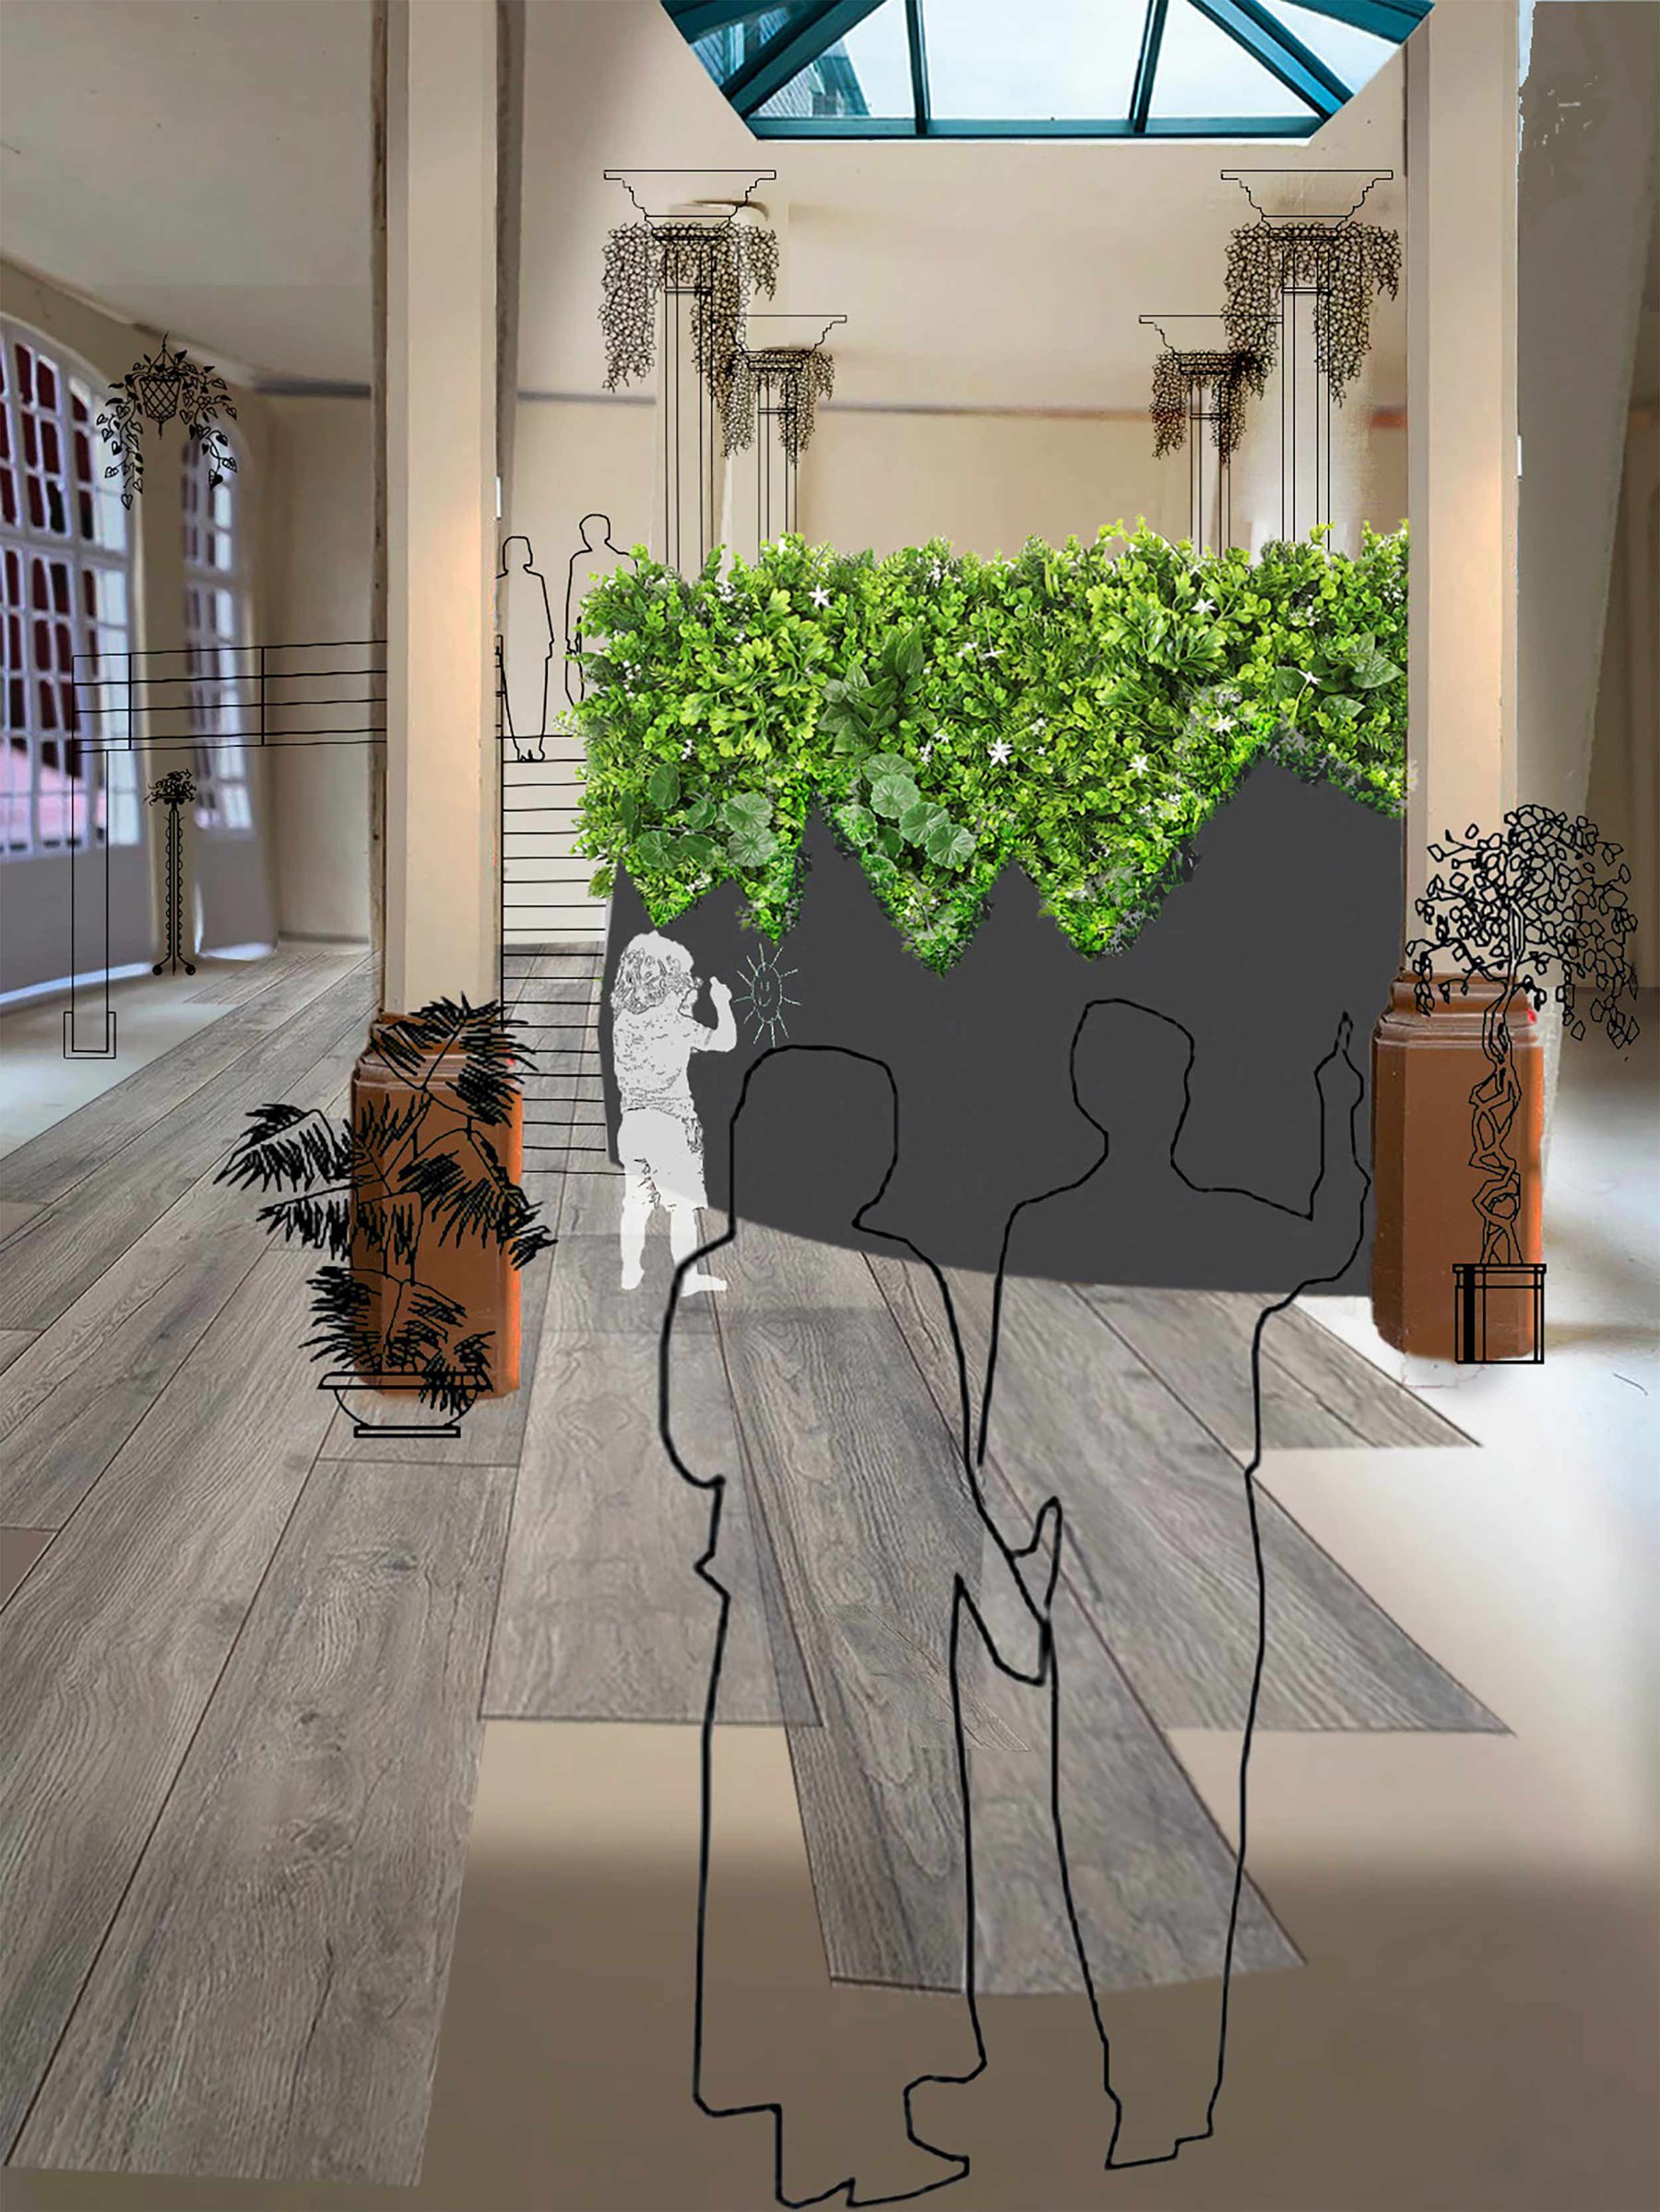 Visual showing planting and people in a room with columns